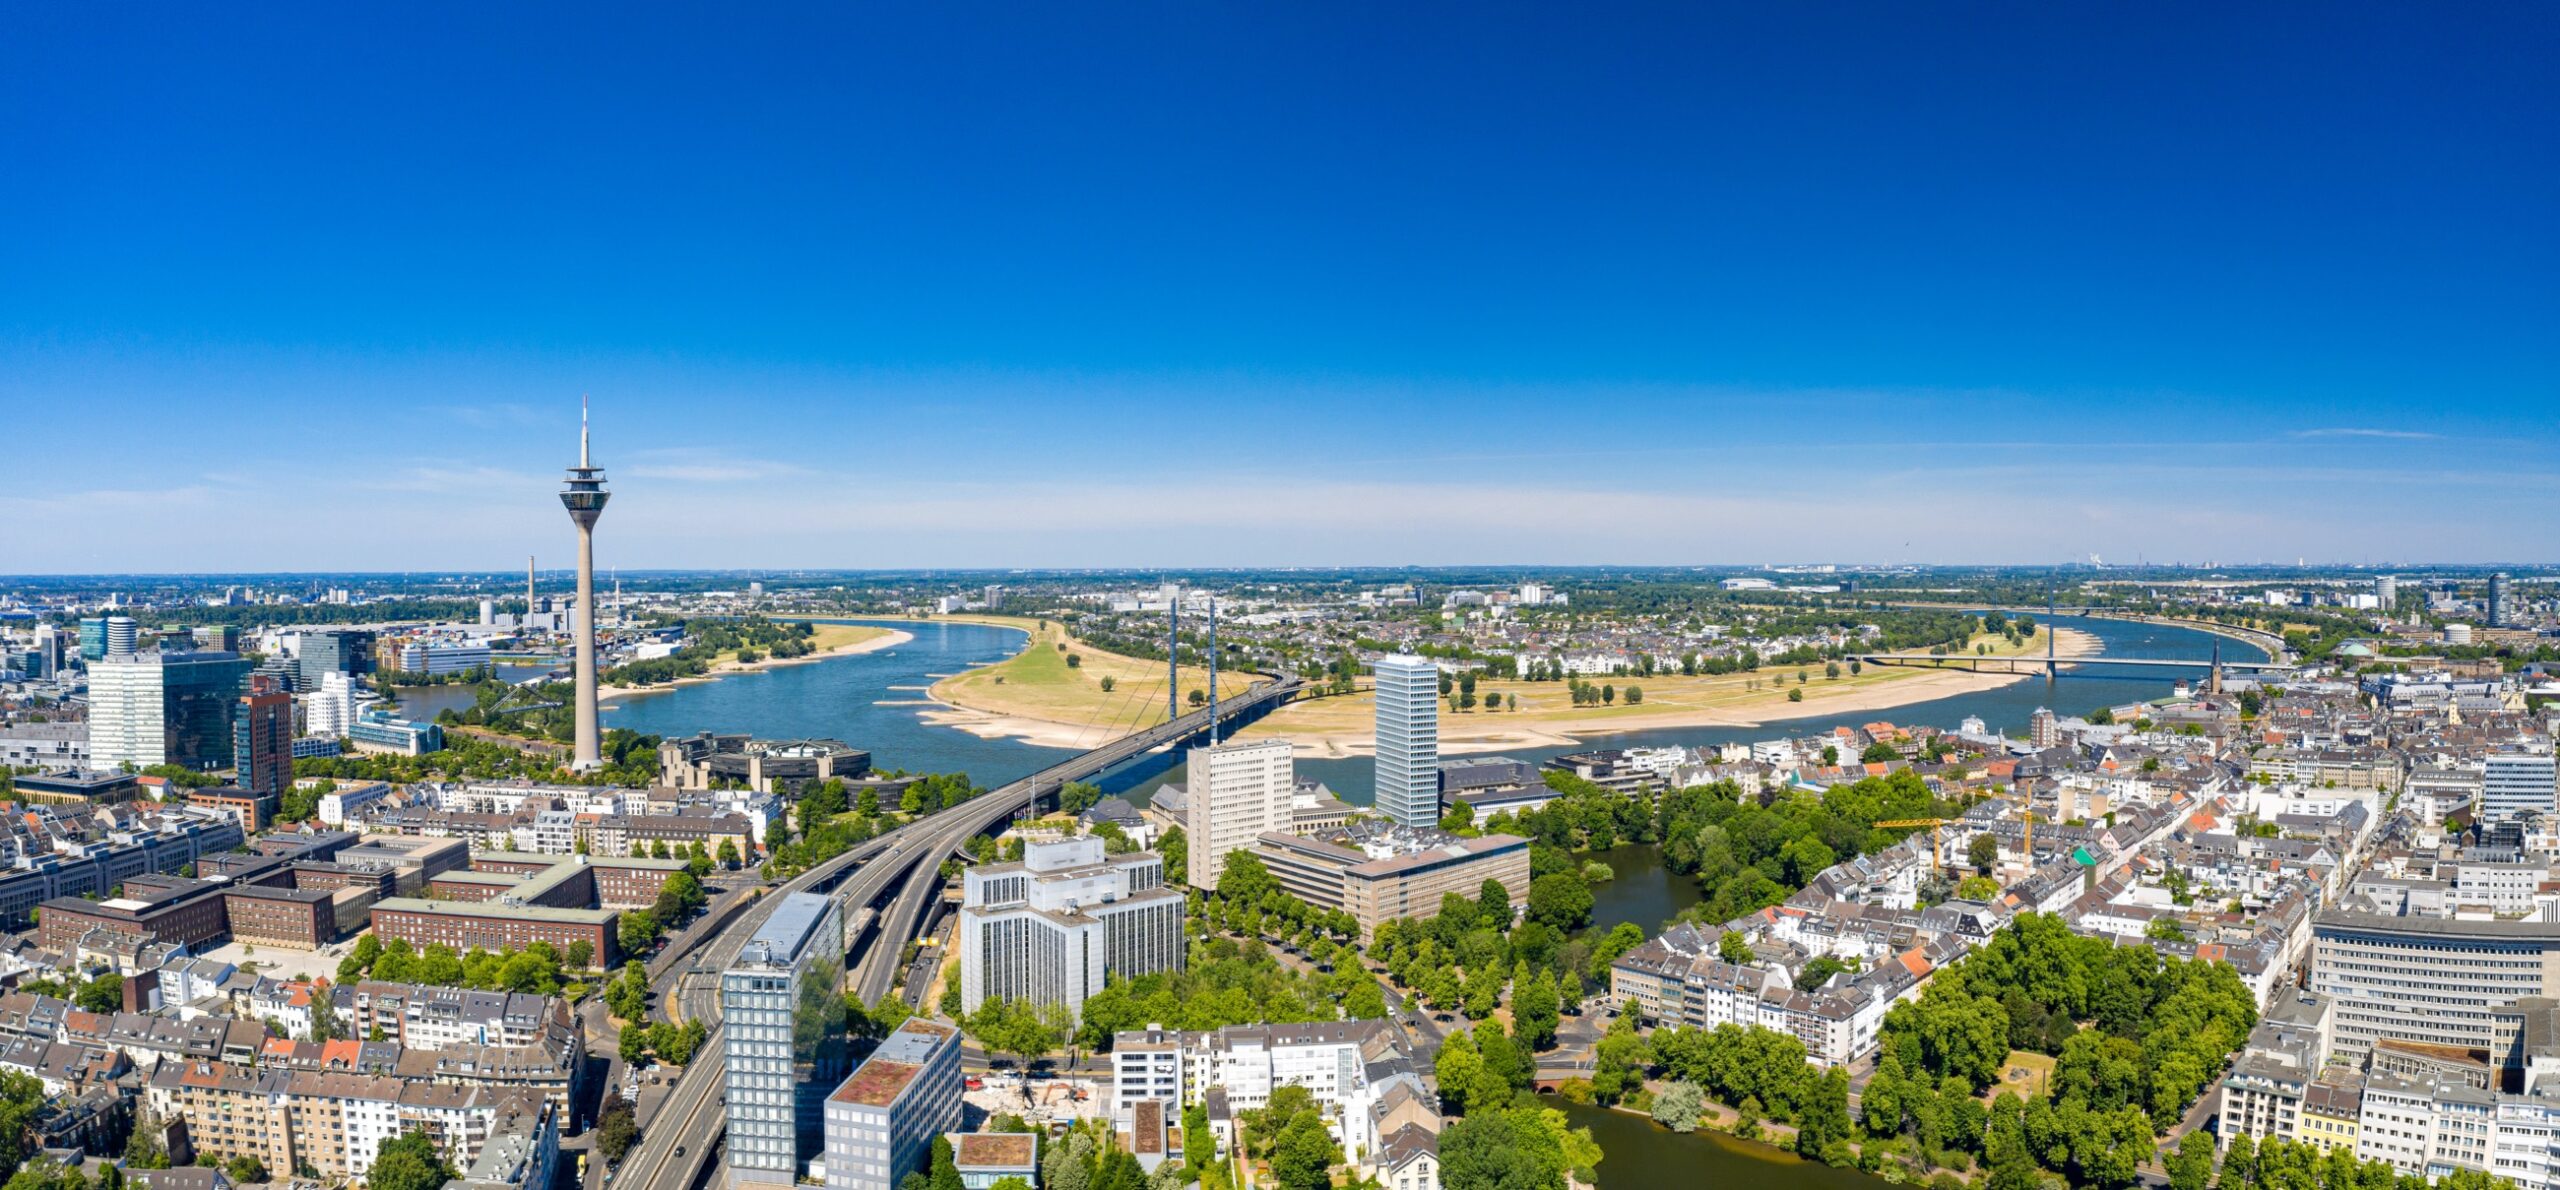 Dusseldorf Delivers: 5 Things to Do in the Fashion City